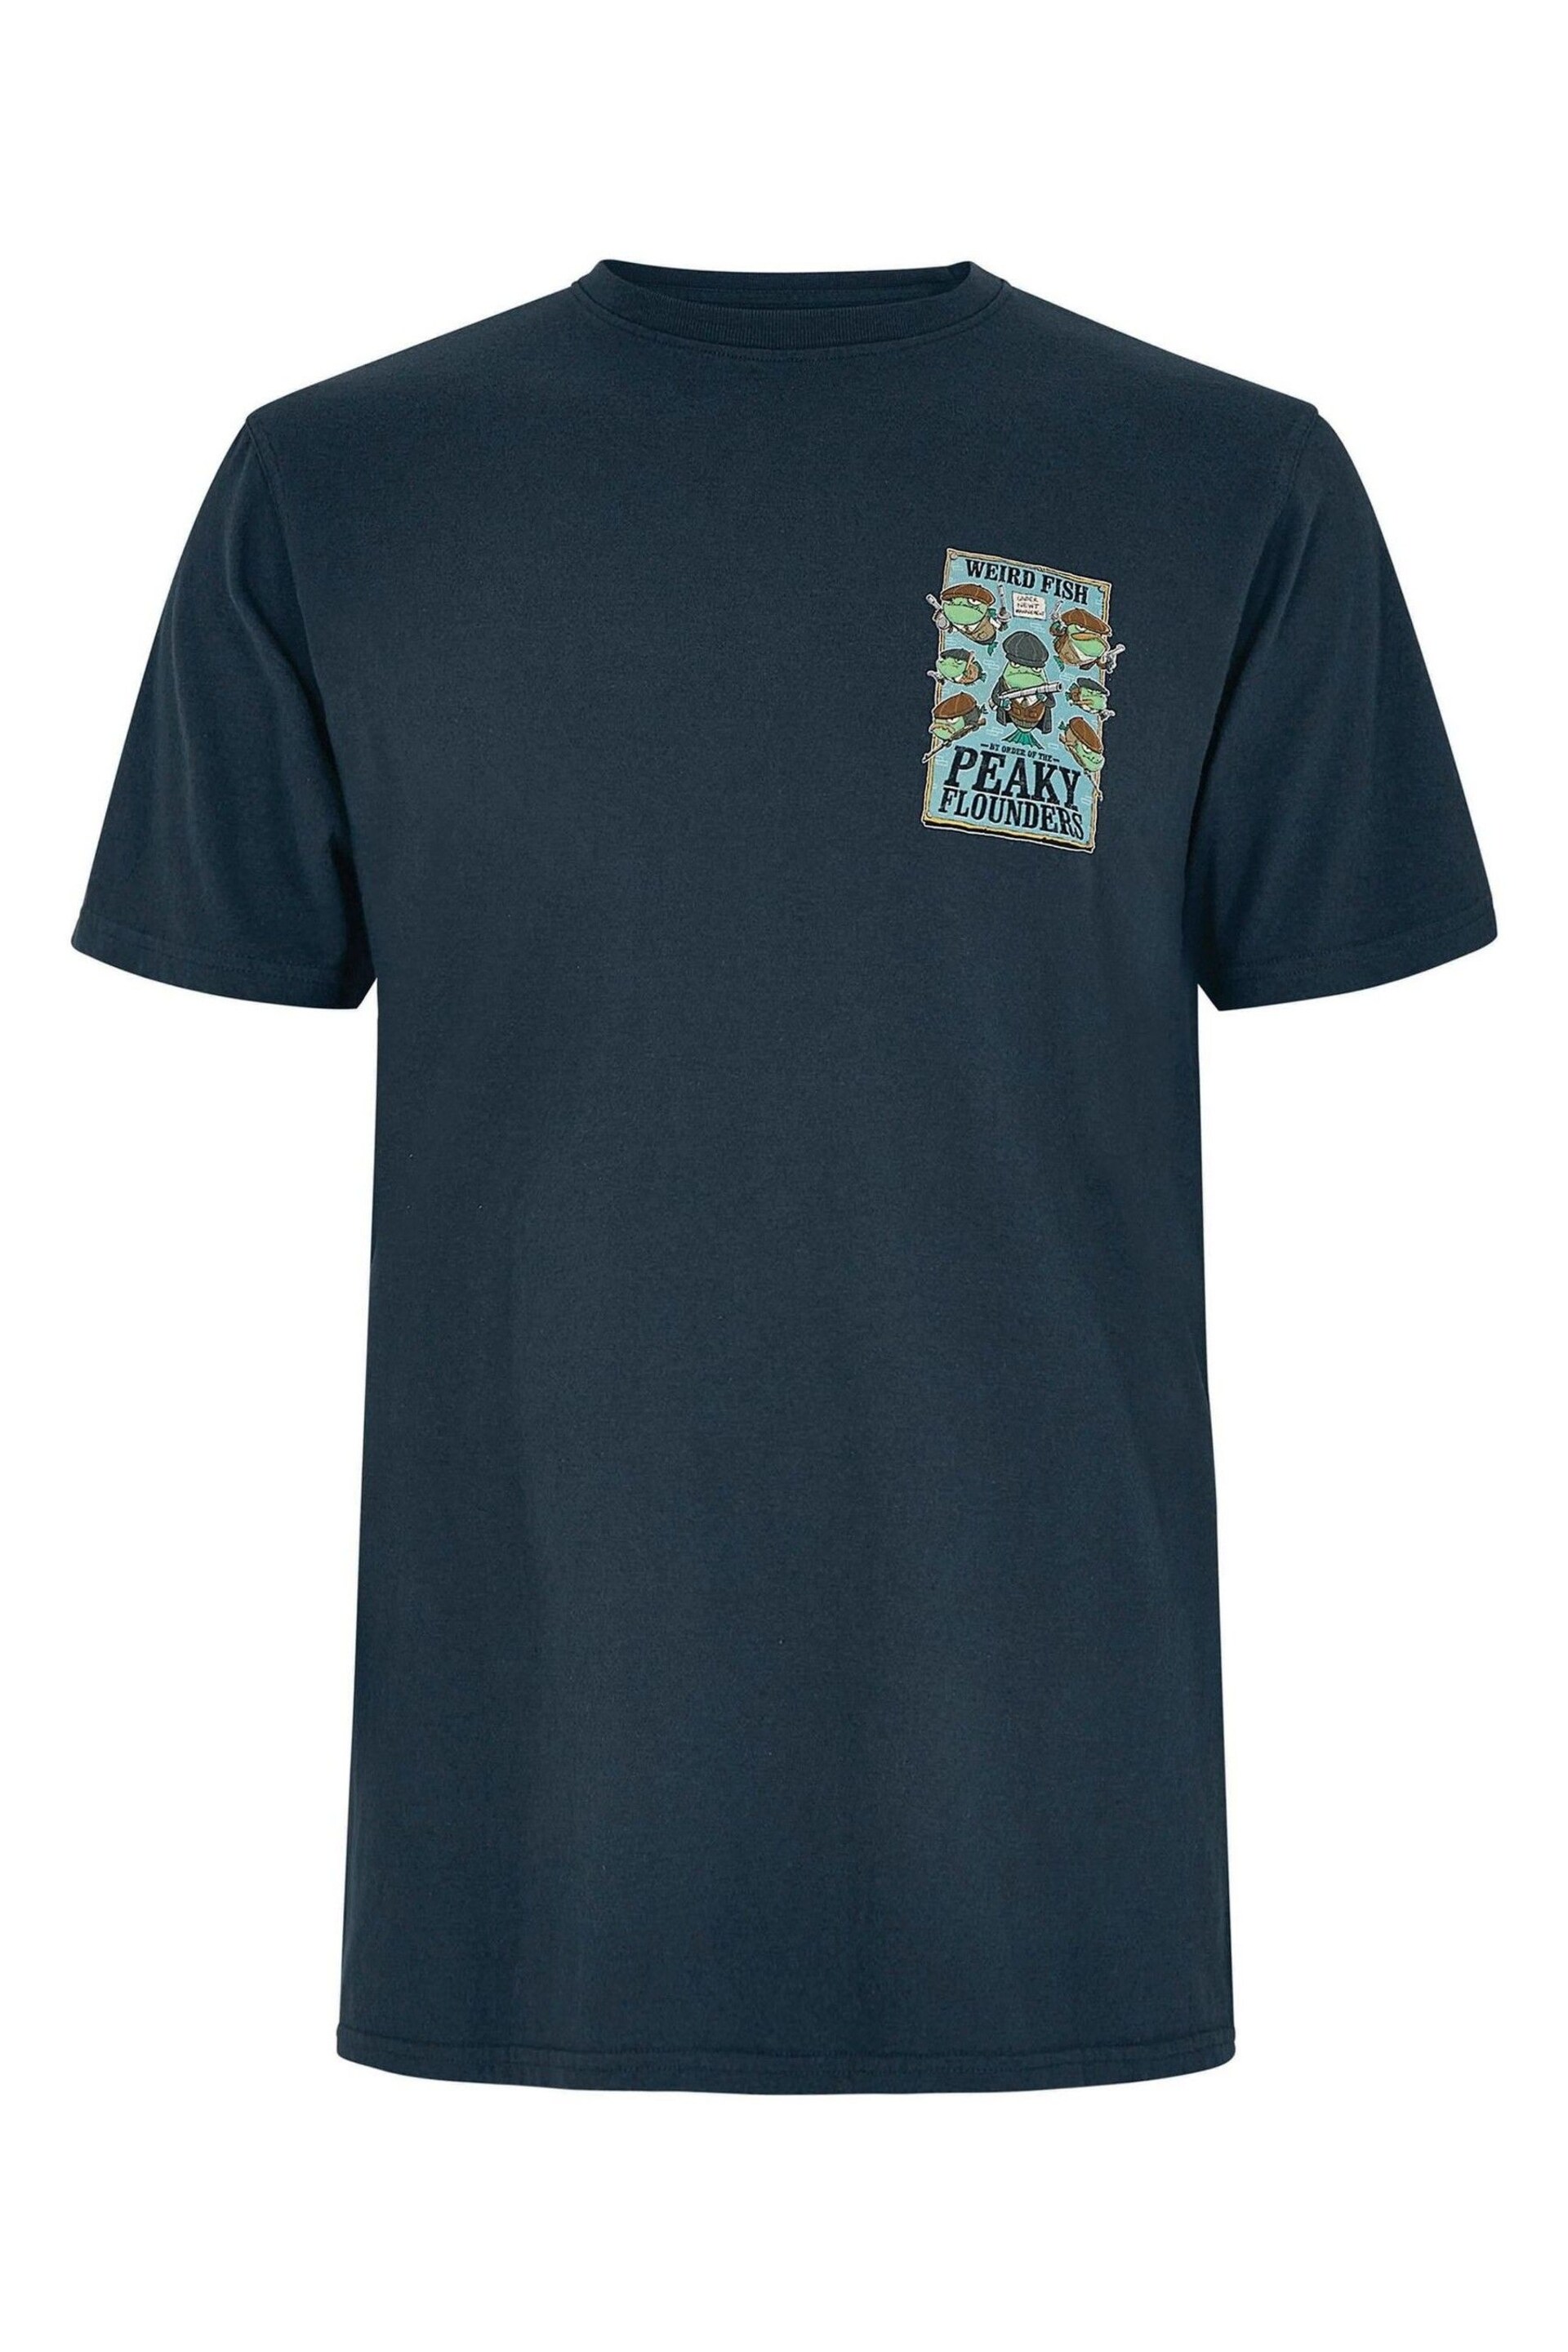 Weird Fish Blue Peaky Flounders Artist T-Shirt - Image 4 of 5